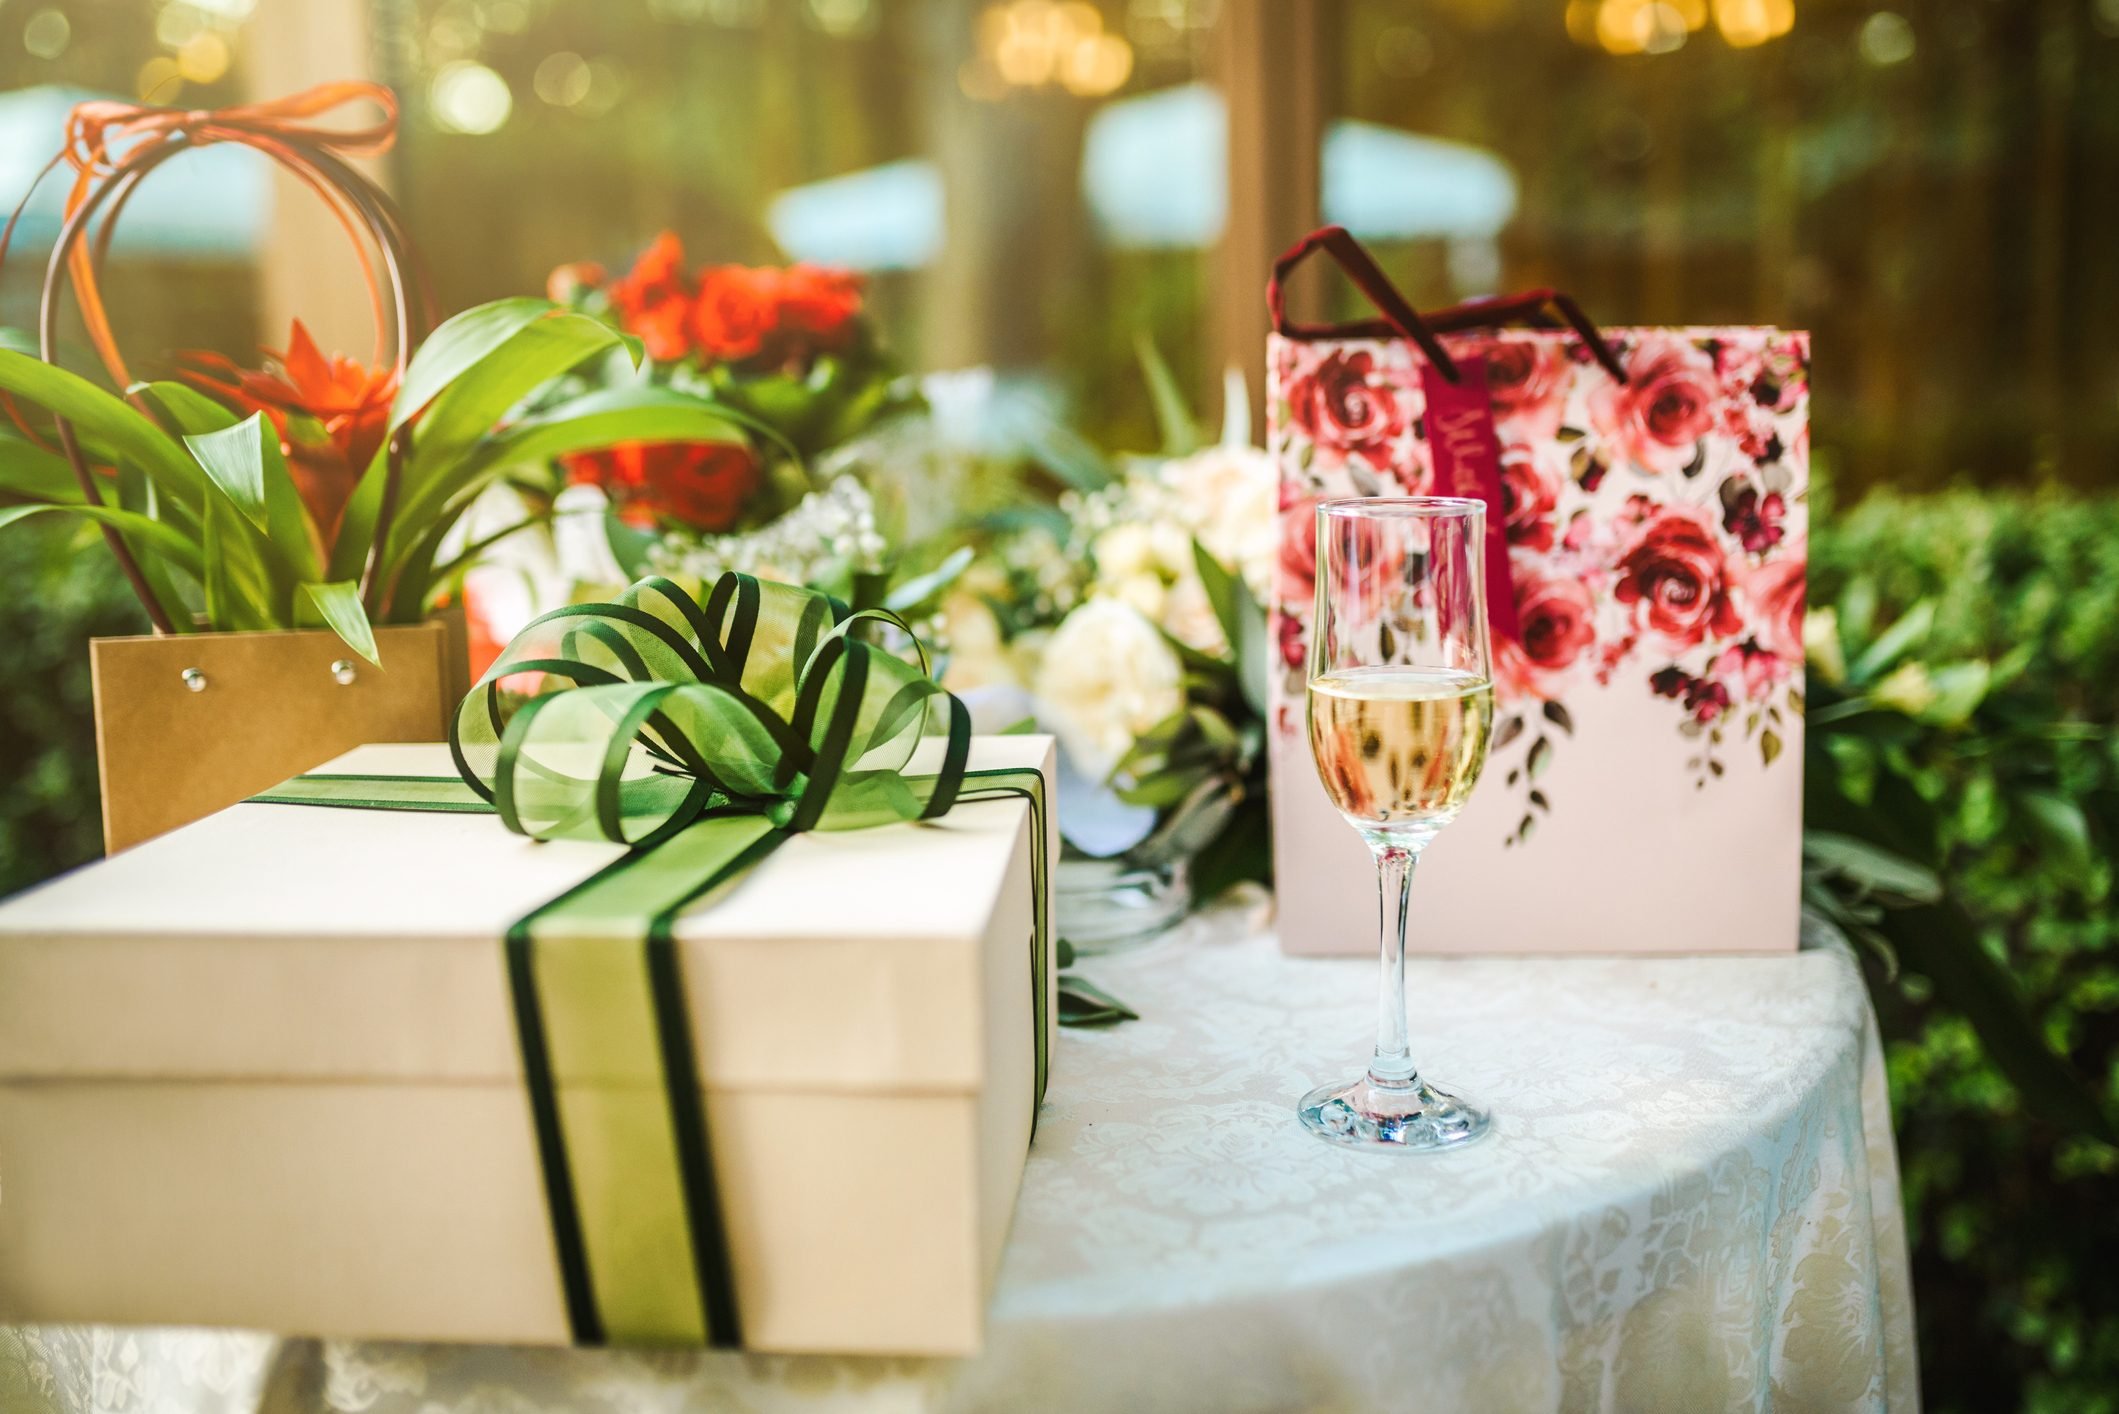 Wedding Gift Etiquette: How Long Do You Have To Send a Gift?